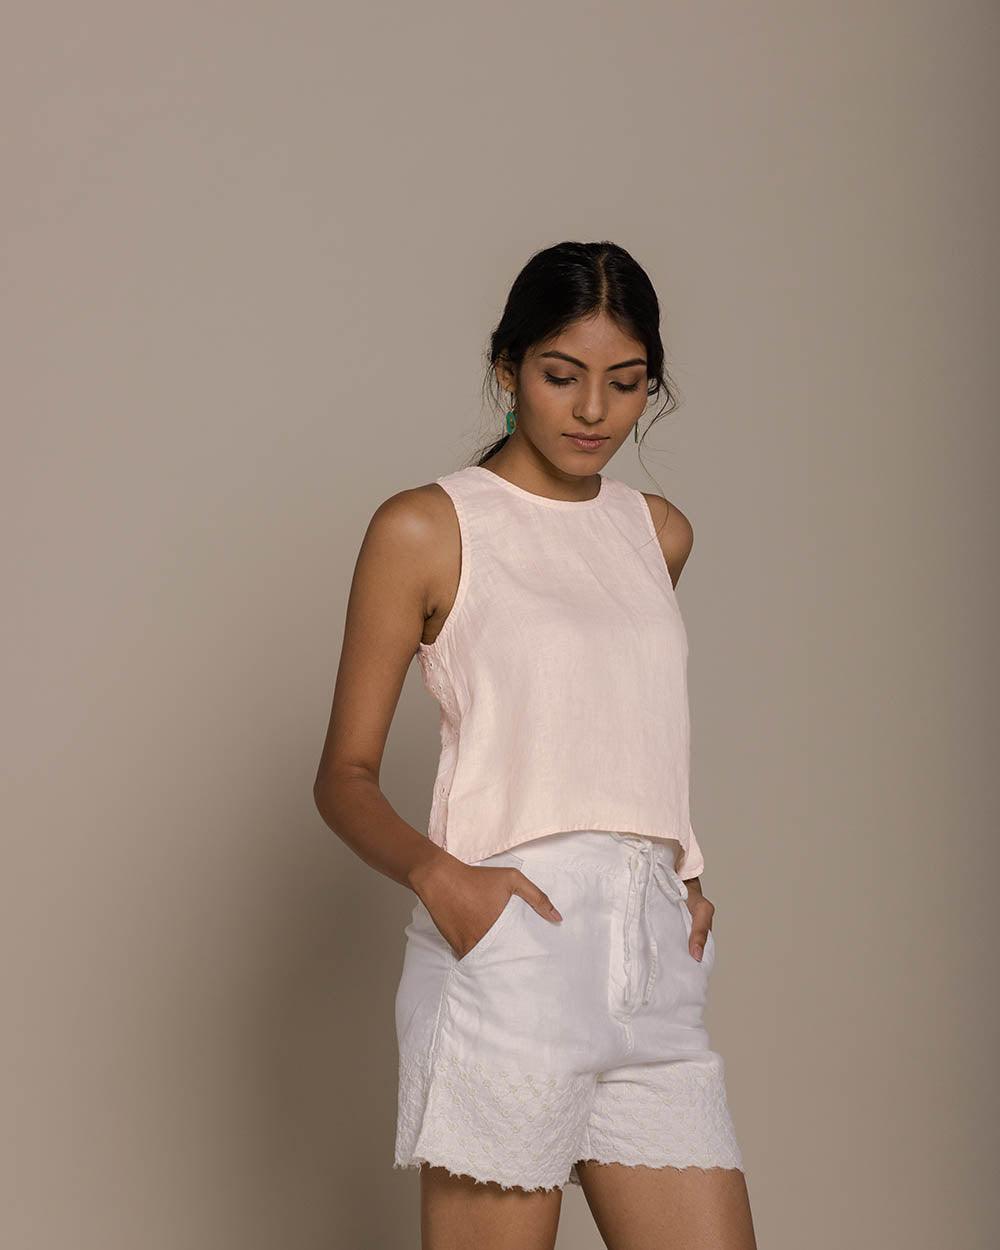 blush pink camisole top with embroidery on the back and brown buttoned details 